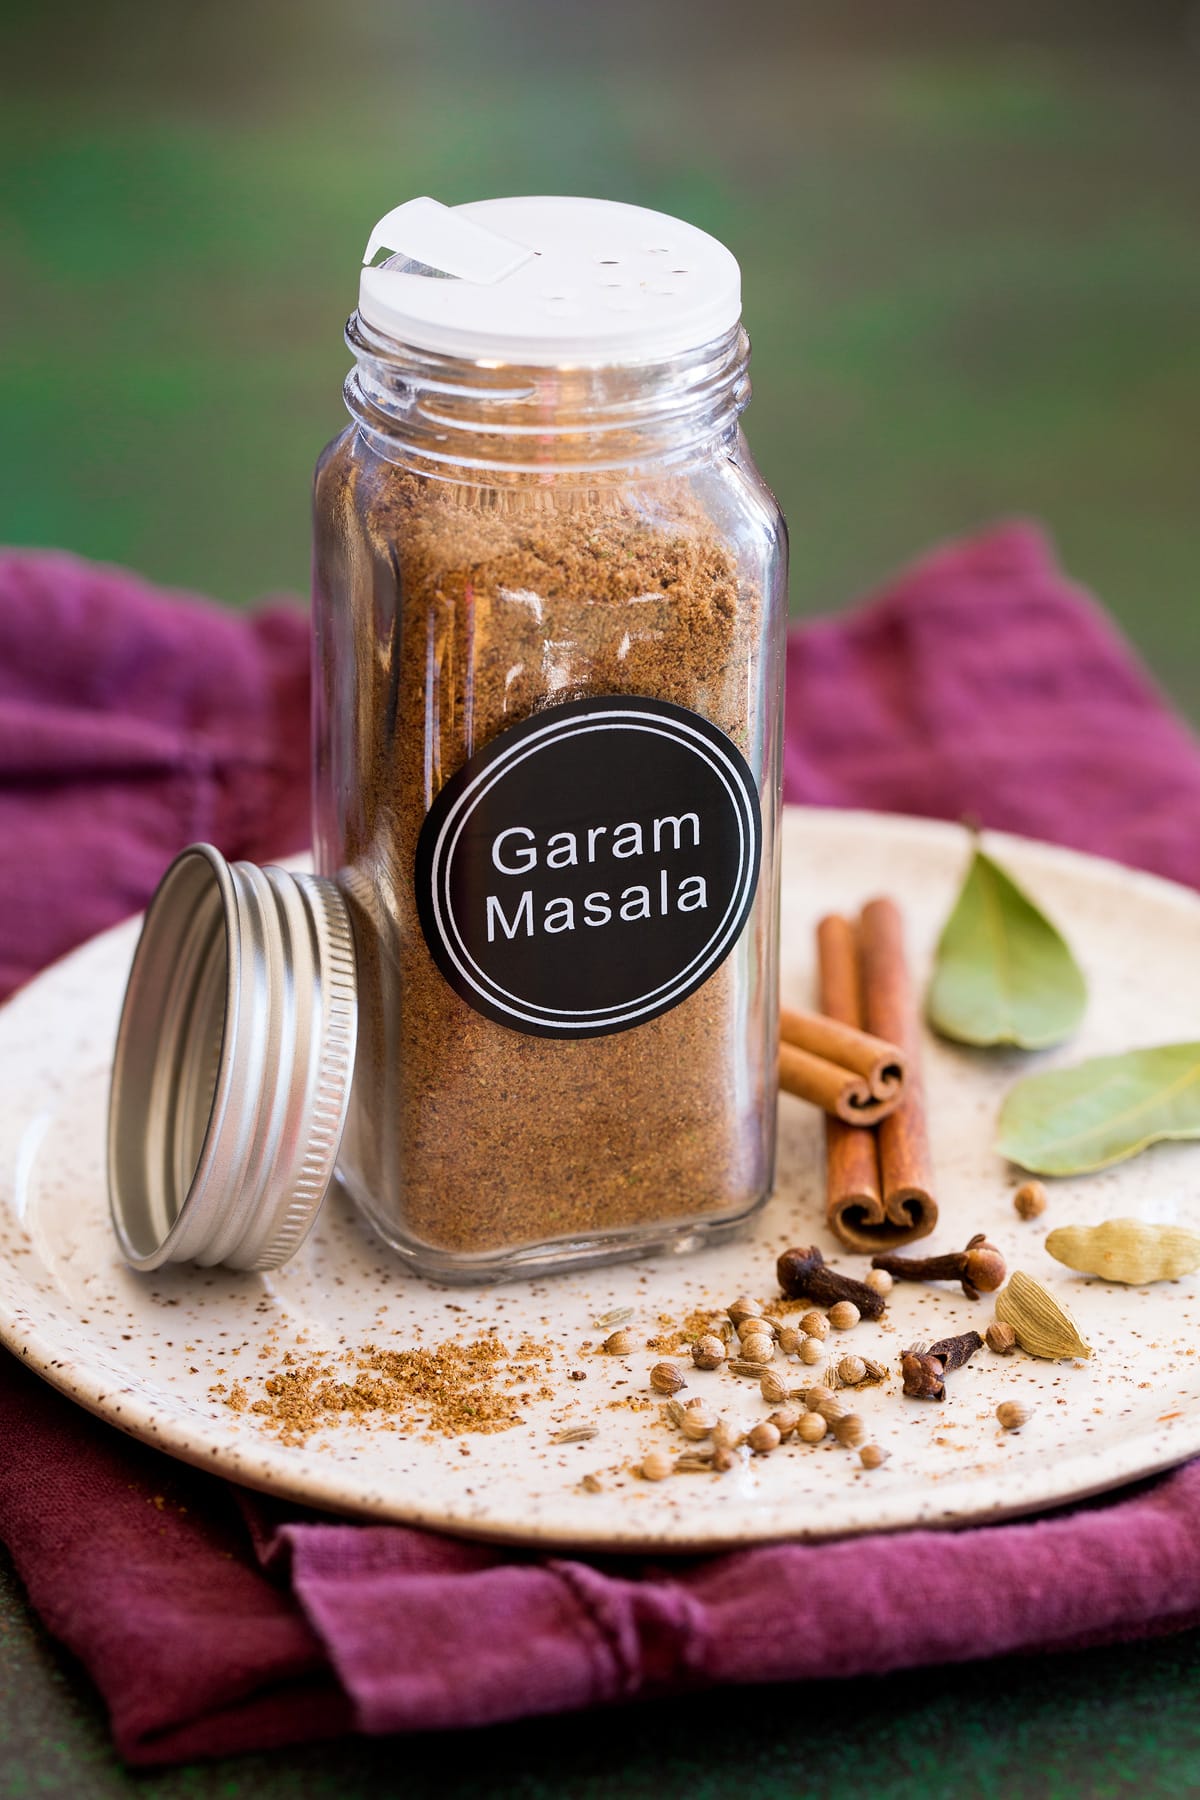 Garam masala spice blend in a glass jar set over a plate with whole spices next to it.